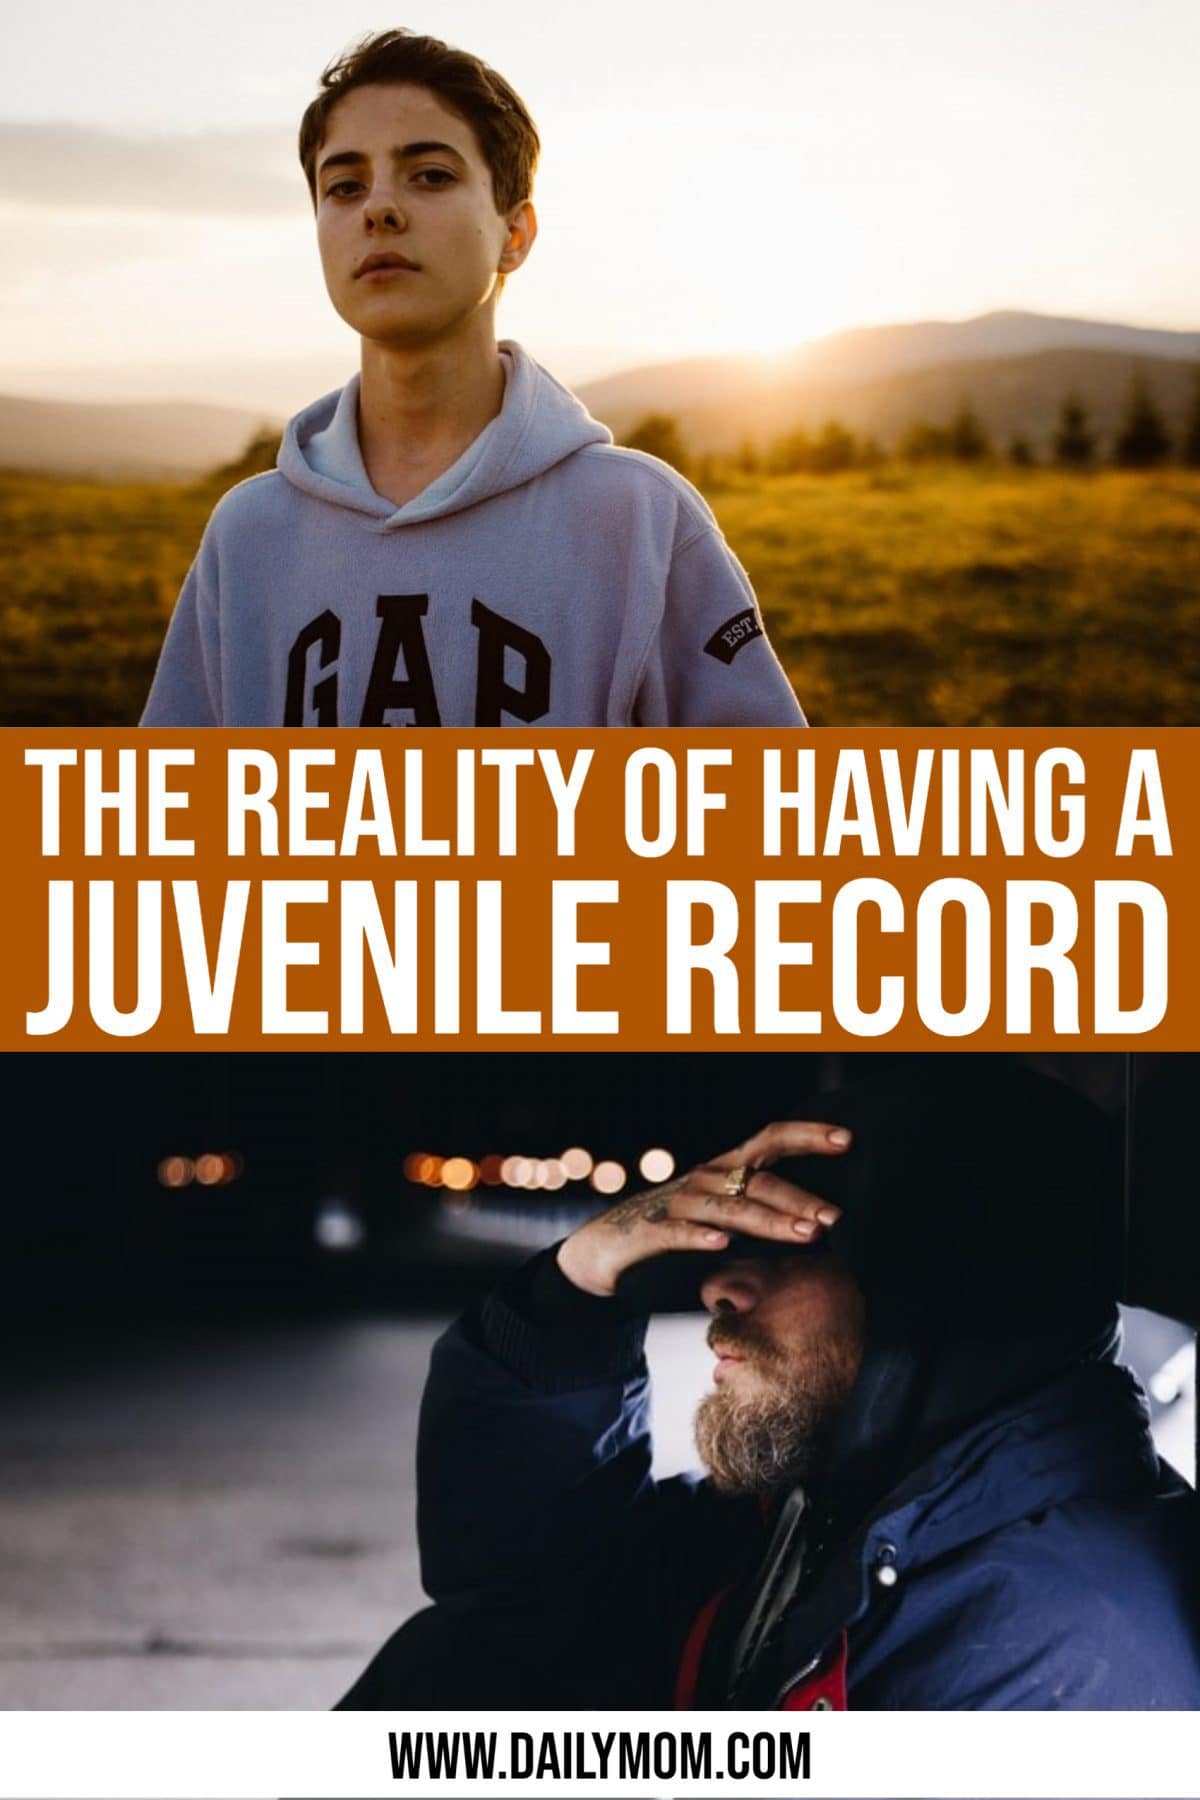 The Bleak Reality Of Having A Juvenile Record